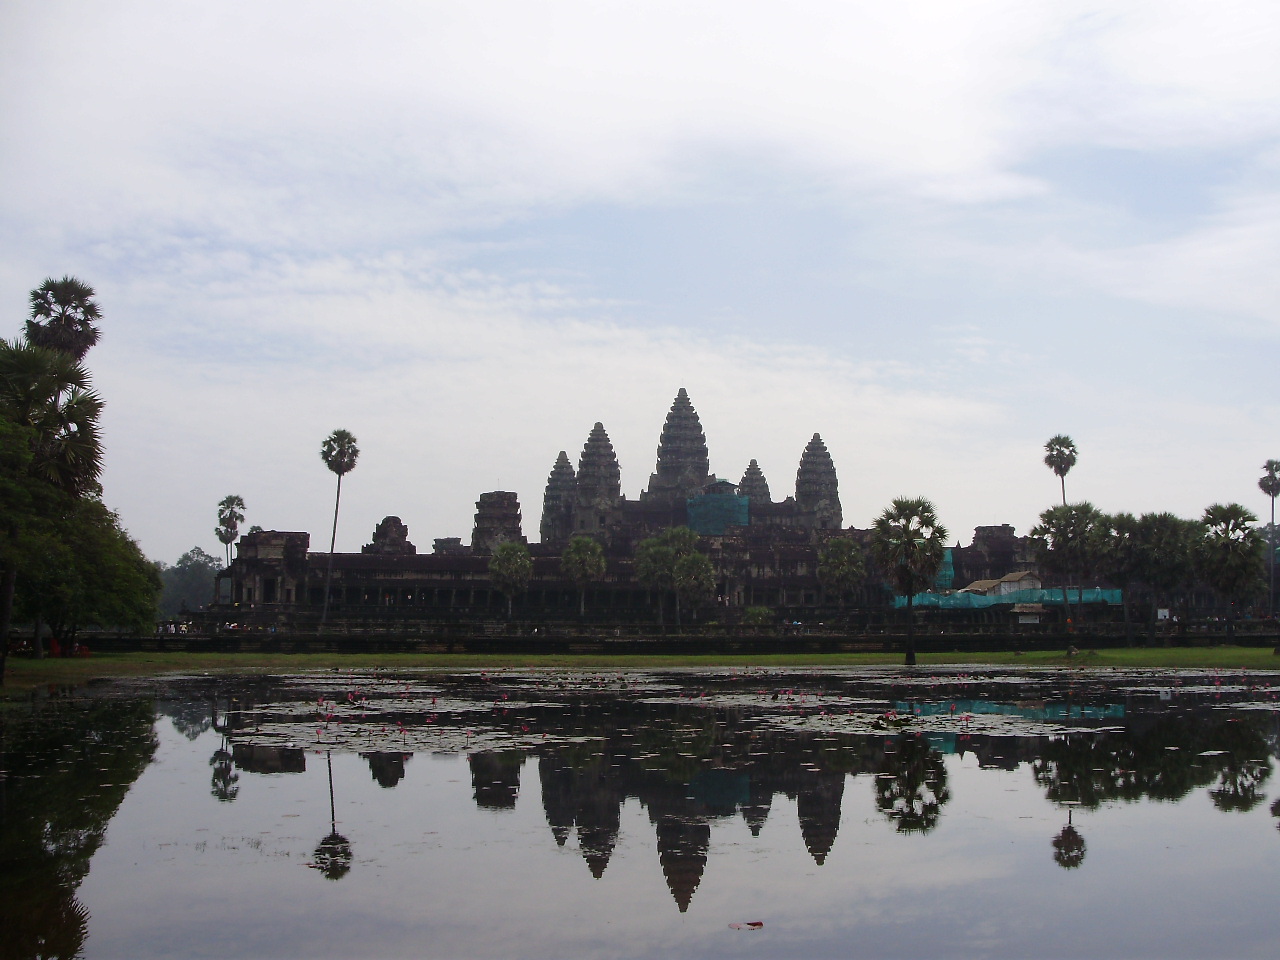 Angkor Wat, Cambodia: Not endangered anymore, but was once on the list